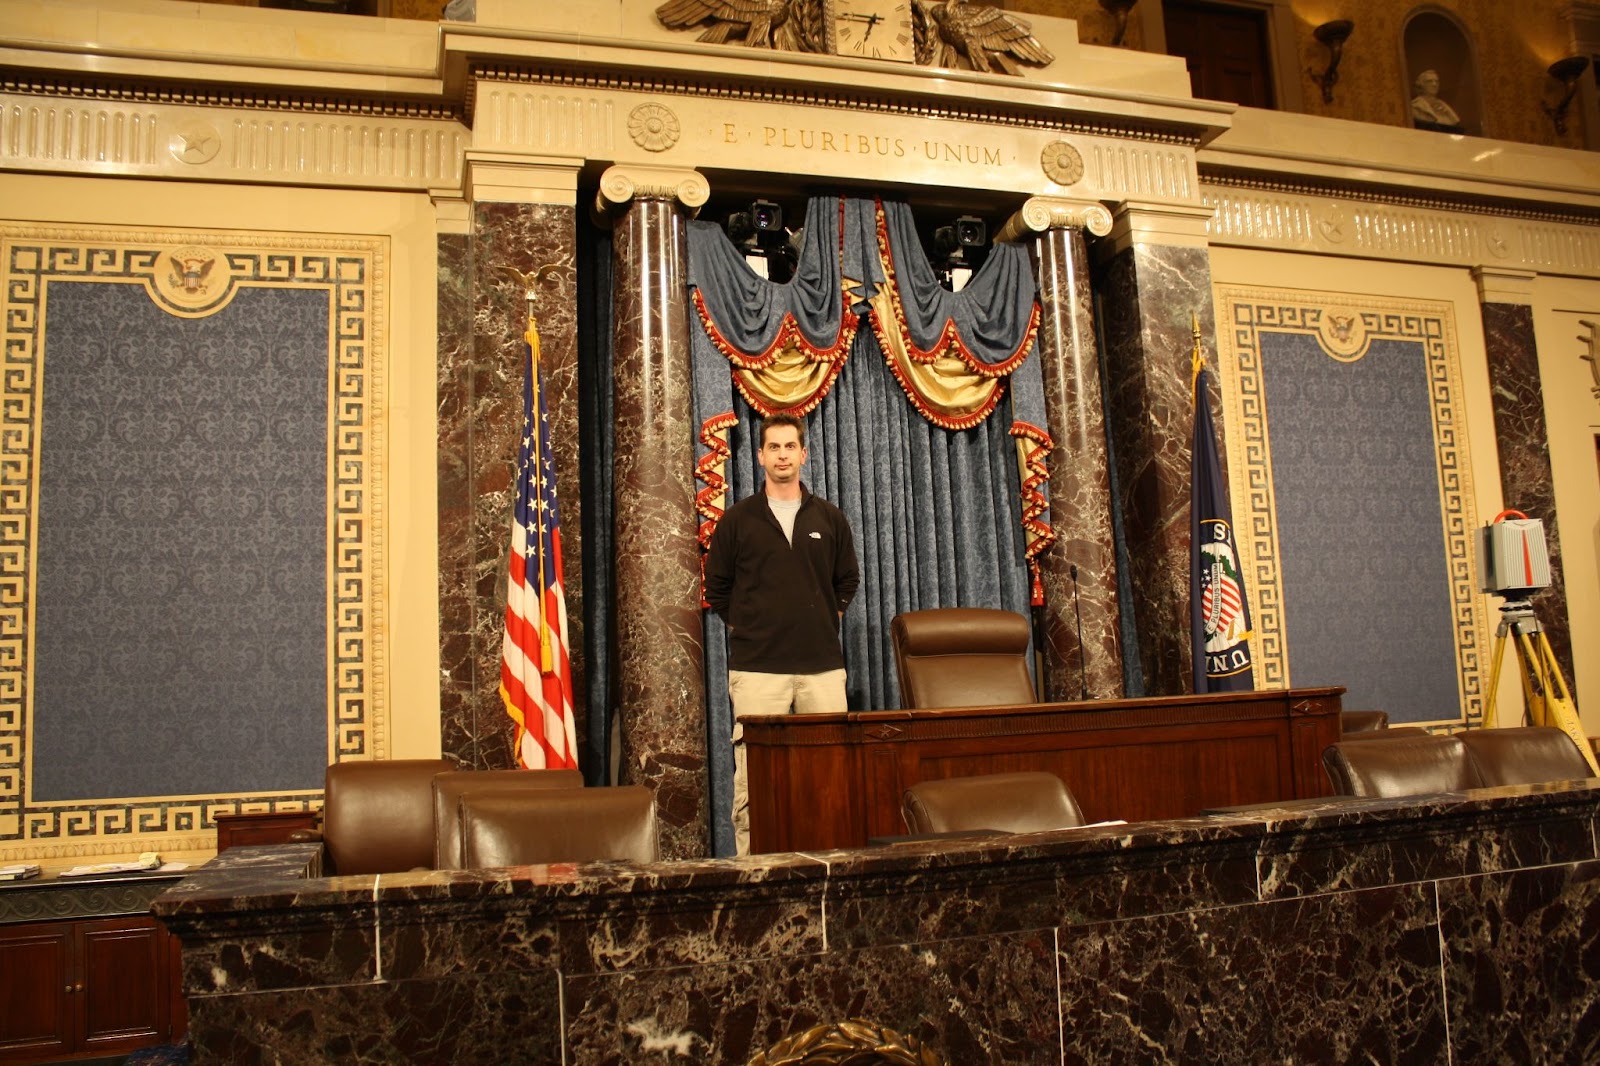 Kurt Yeghian, Founder and CEO of Existing Conditions, on-site at the United States Senate Chamber, 2009